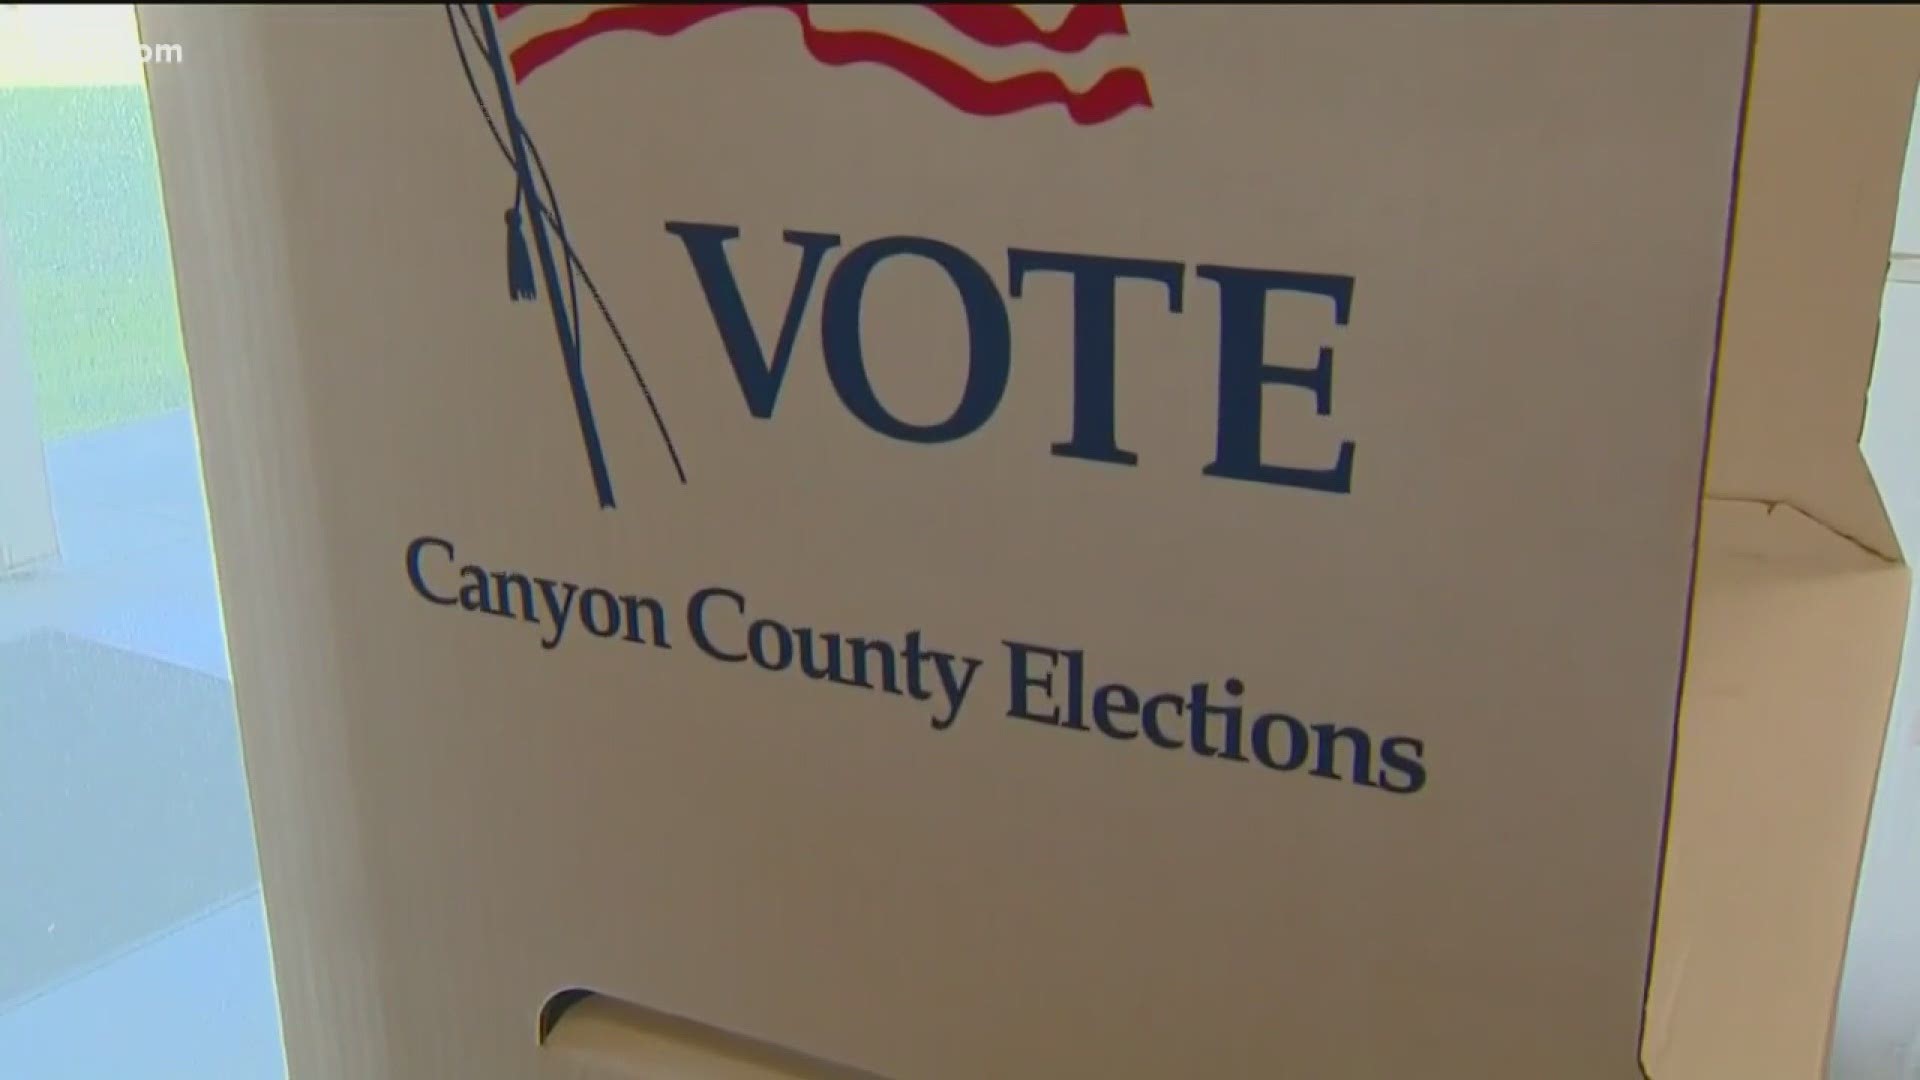 Canyon County officials say they don't have enough trained poll workers but Ada County has too many applicants for theirs.